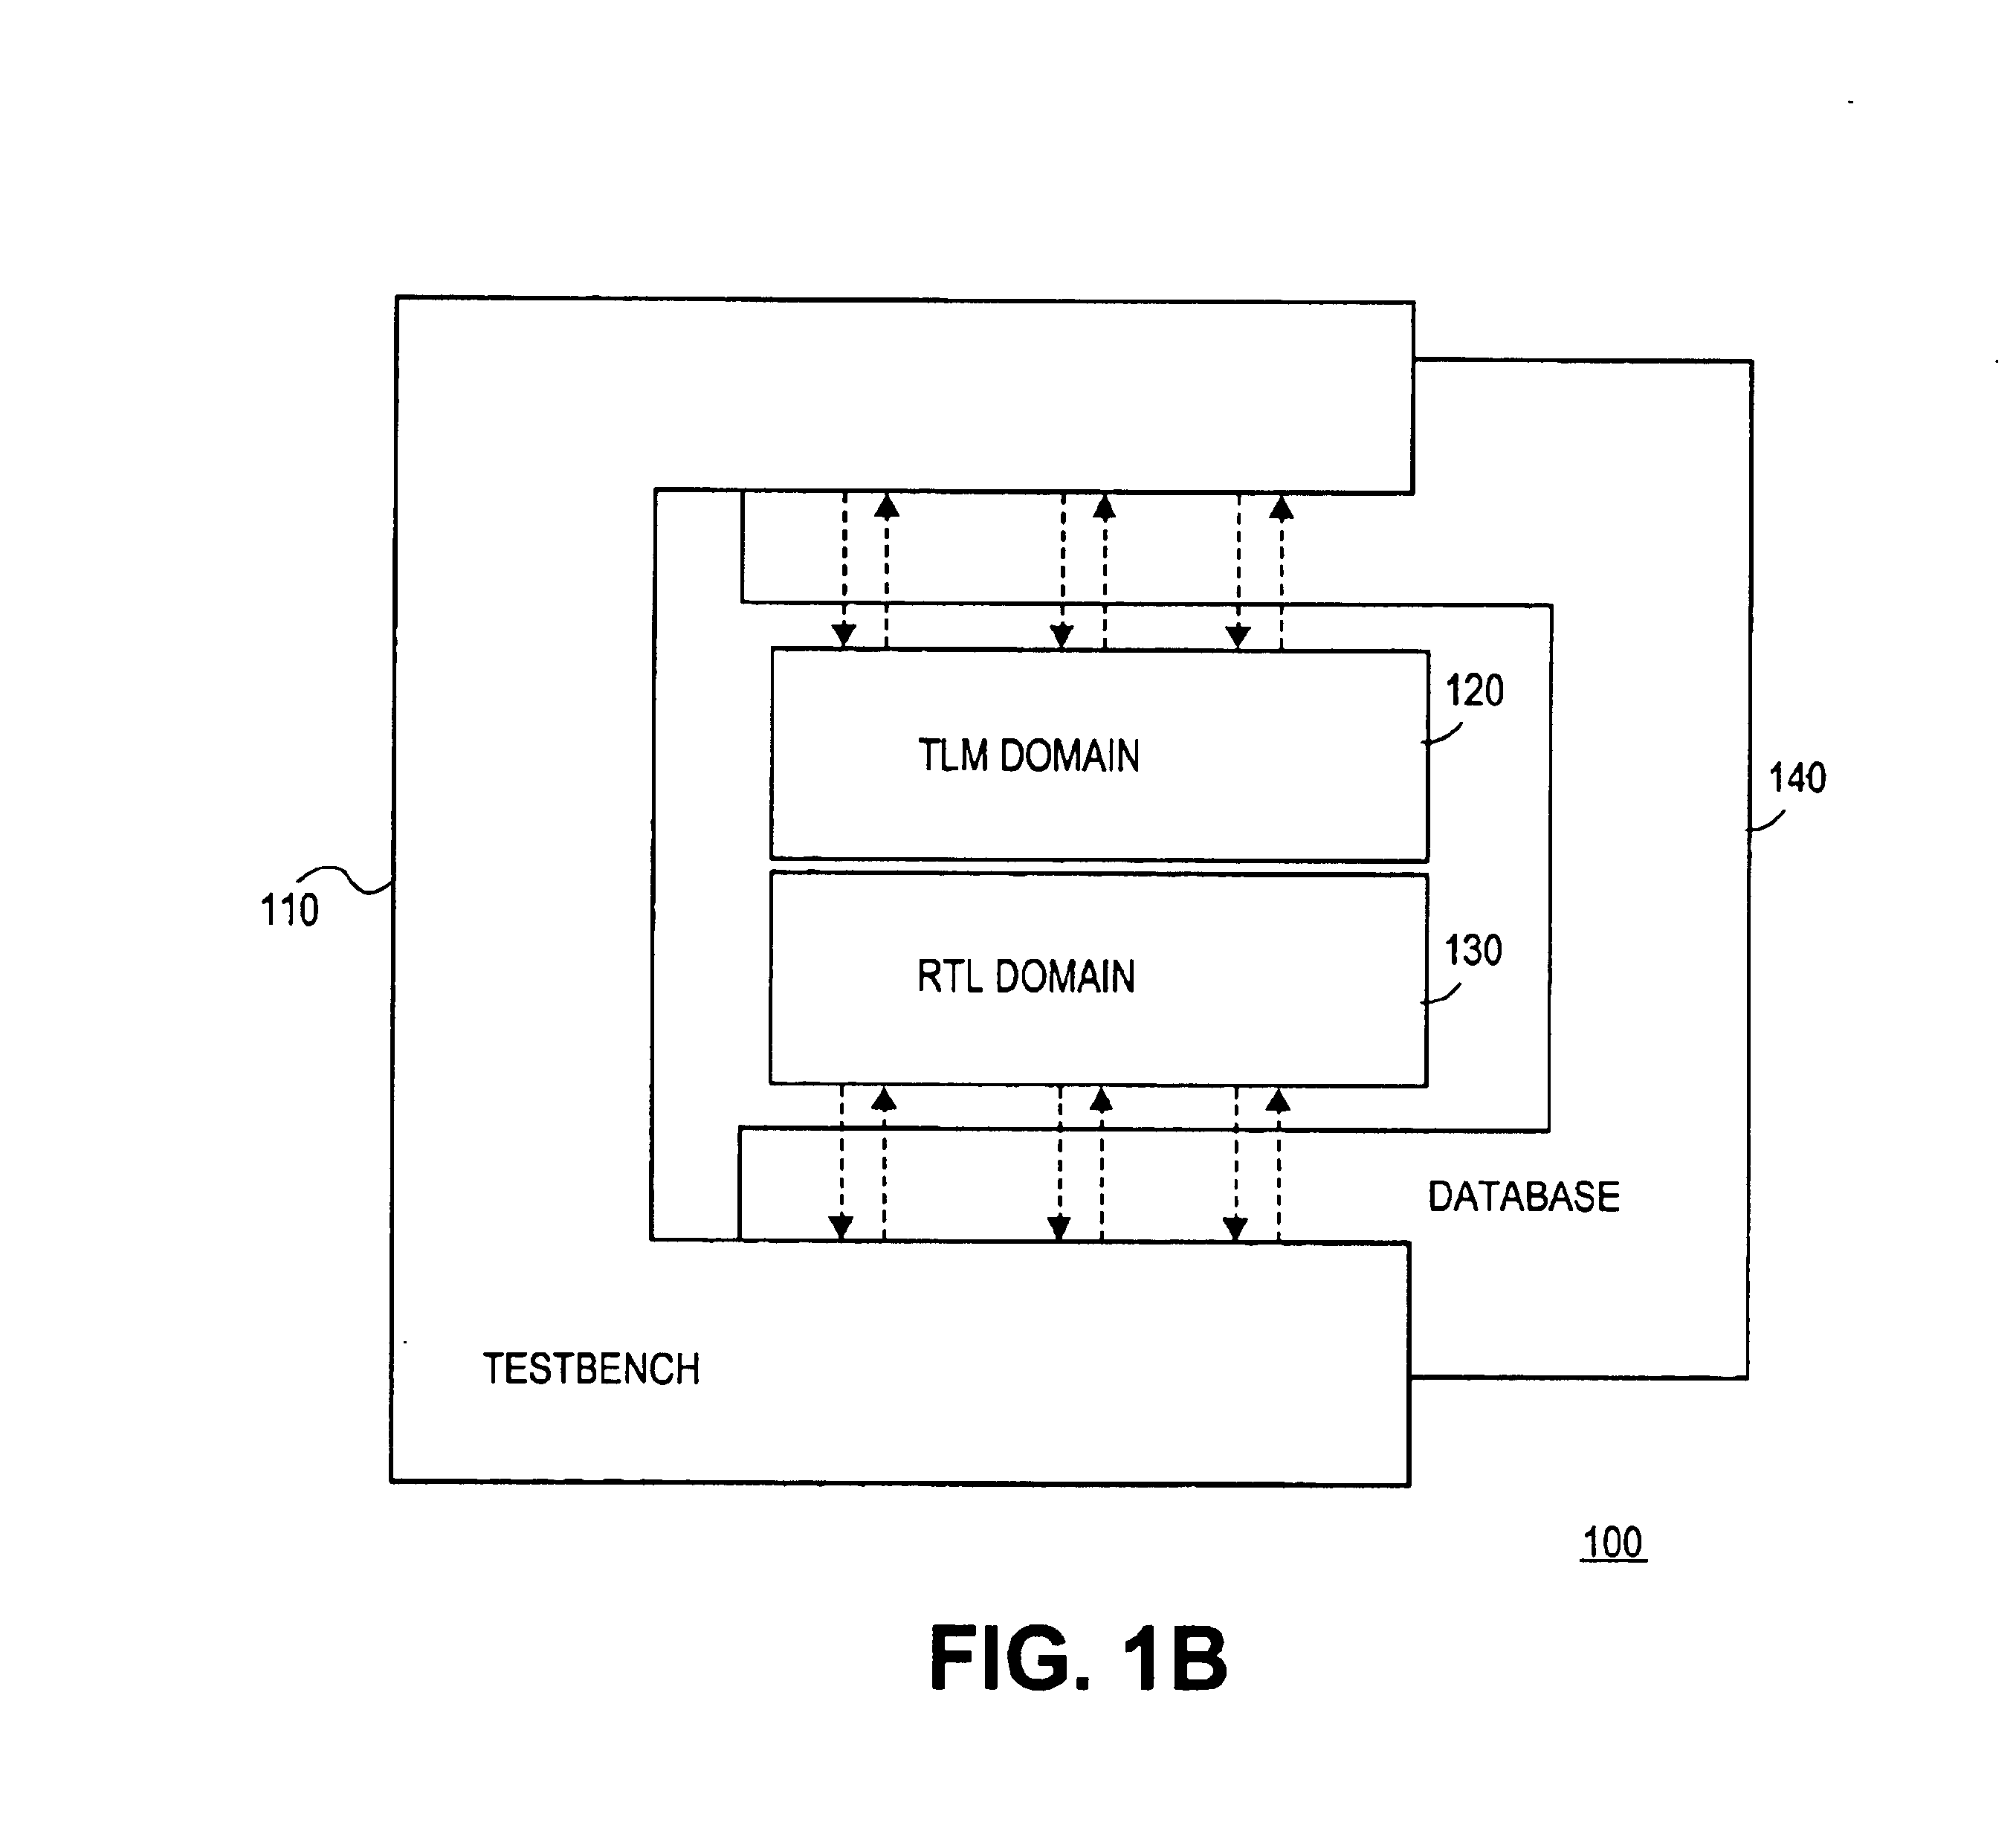 Method and mechanism for improved performance analysis in transaction level models